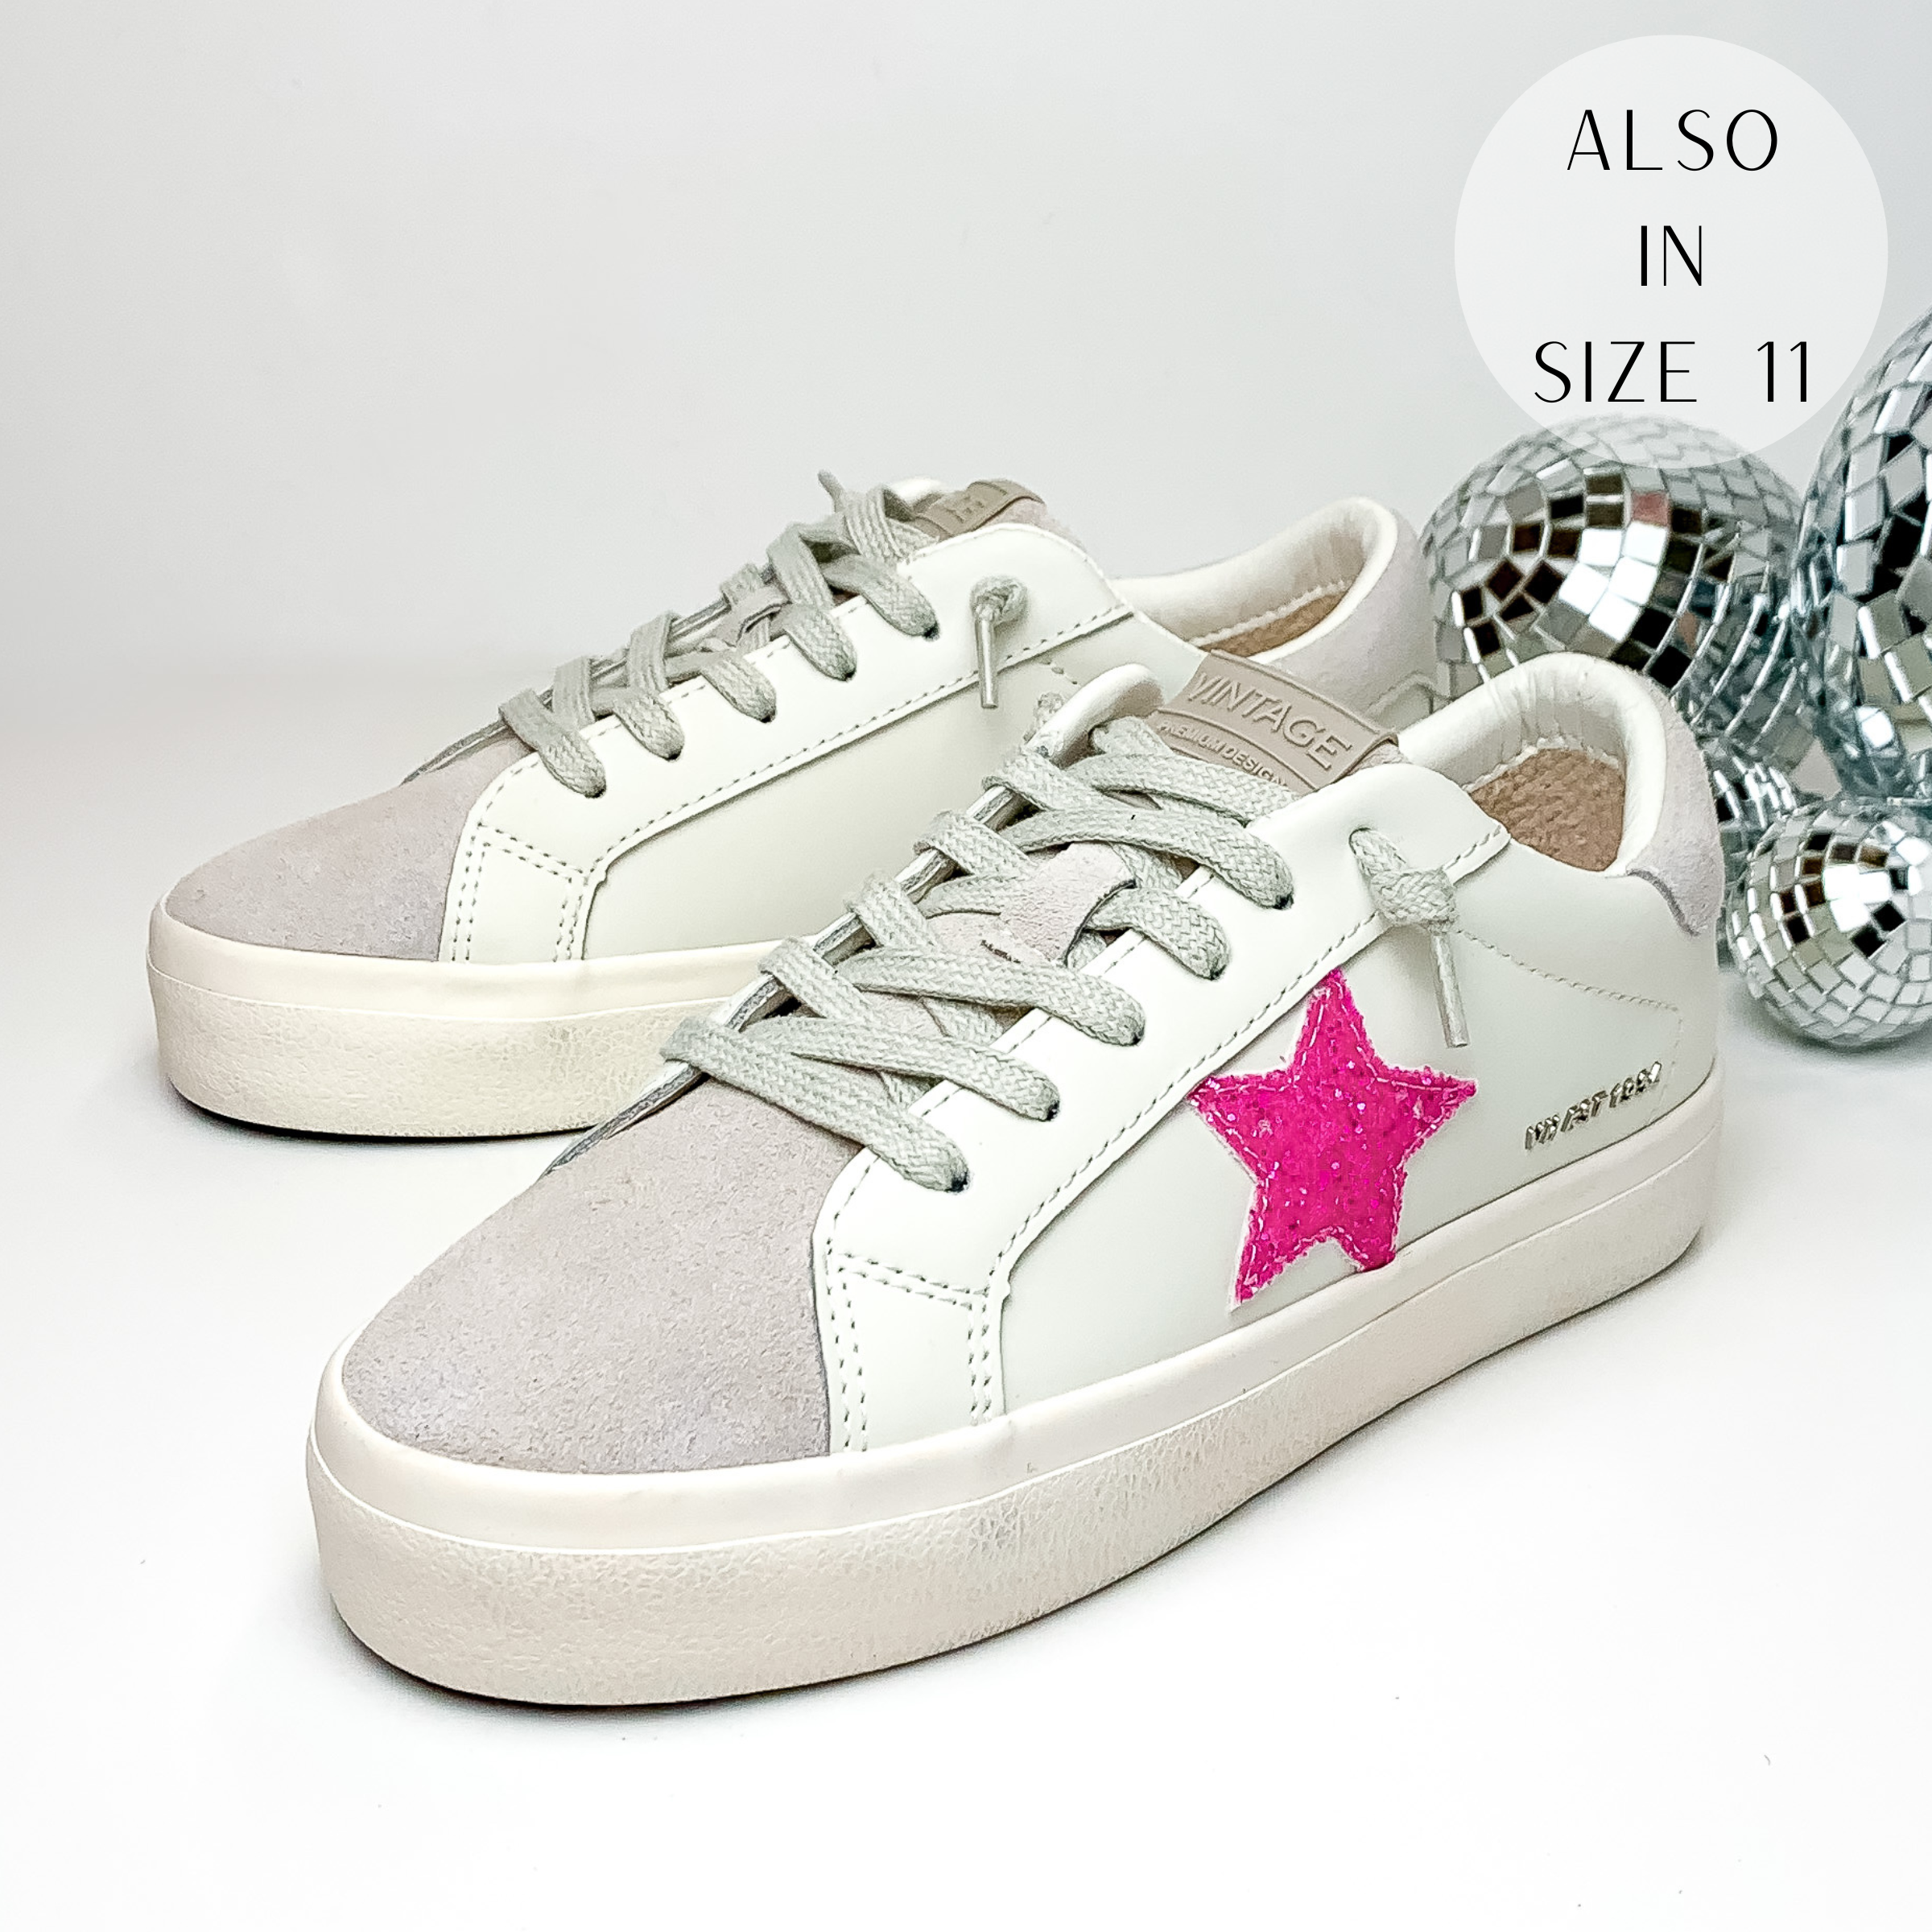 White tennis shoes with a light grey fabric on the tongue and on the back of the heel. These shoes also have a bright pink glitter star emblem on the side of the shoe. These shoes are pictured on a white background with disco balls behind them on the right hand side.